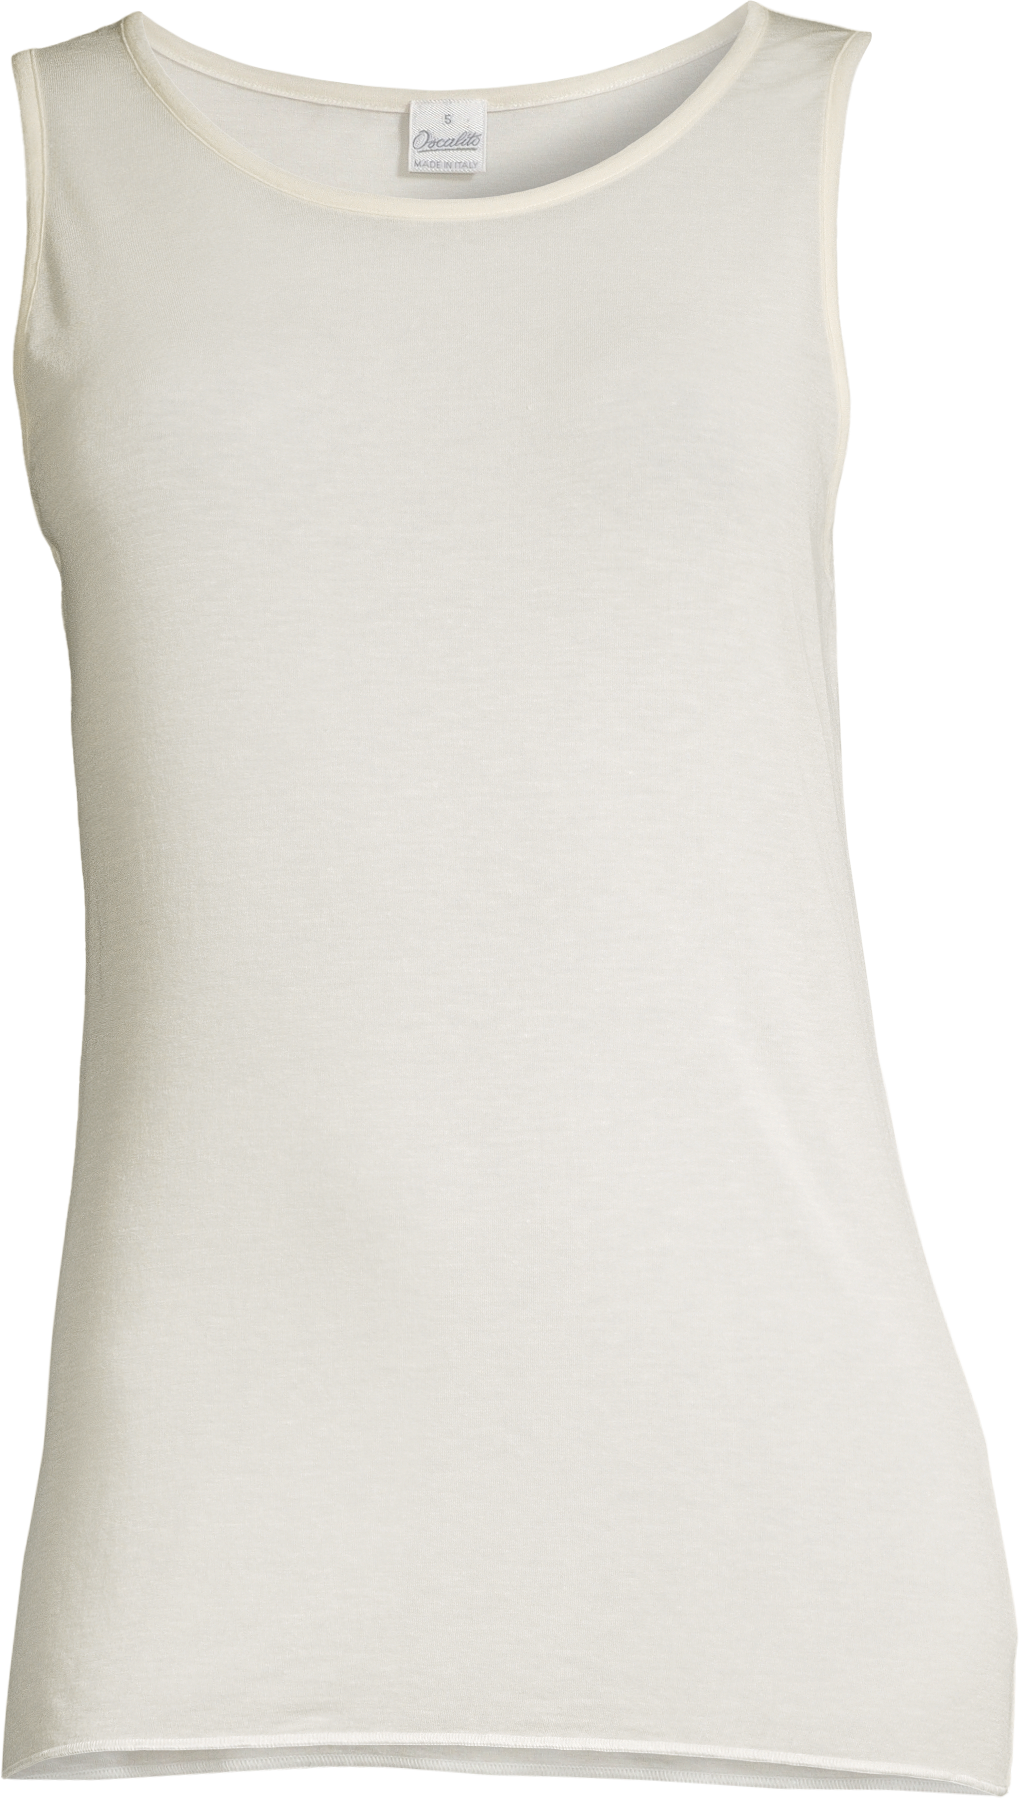 Ultralight Tank top in Modal and Cashmere 1480 - Oscalito